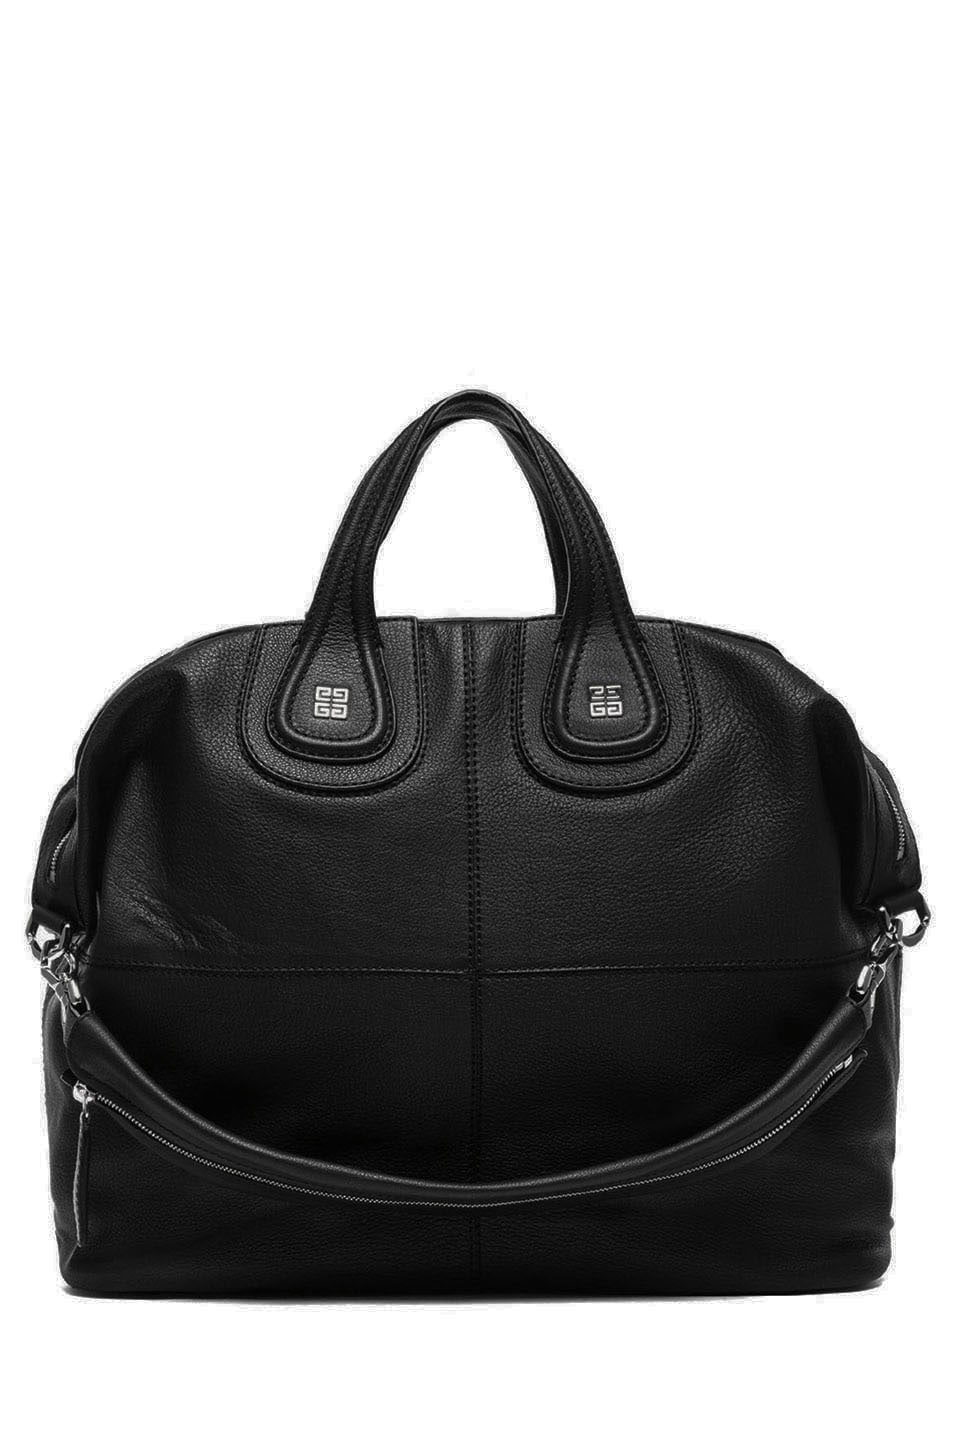 Givenchy Large Nightingale in Black | FWRD